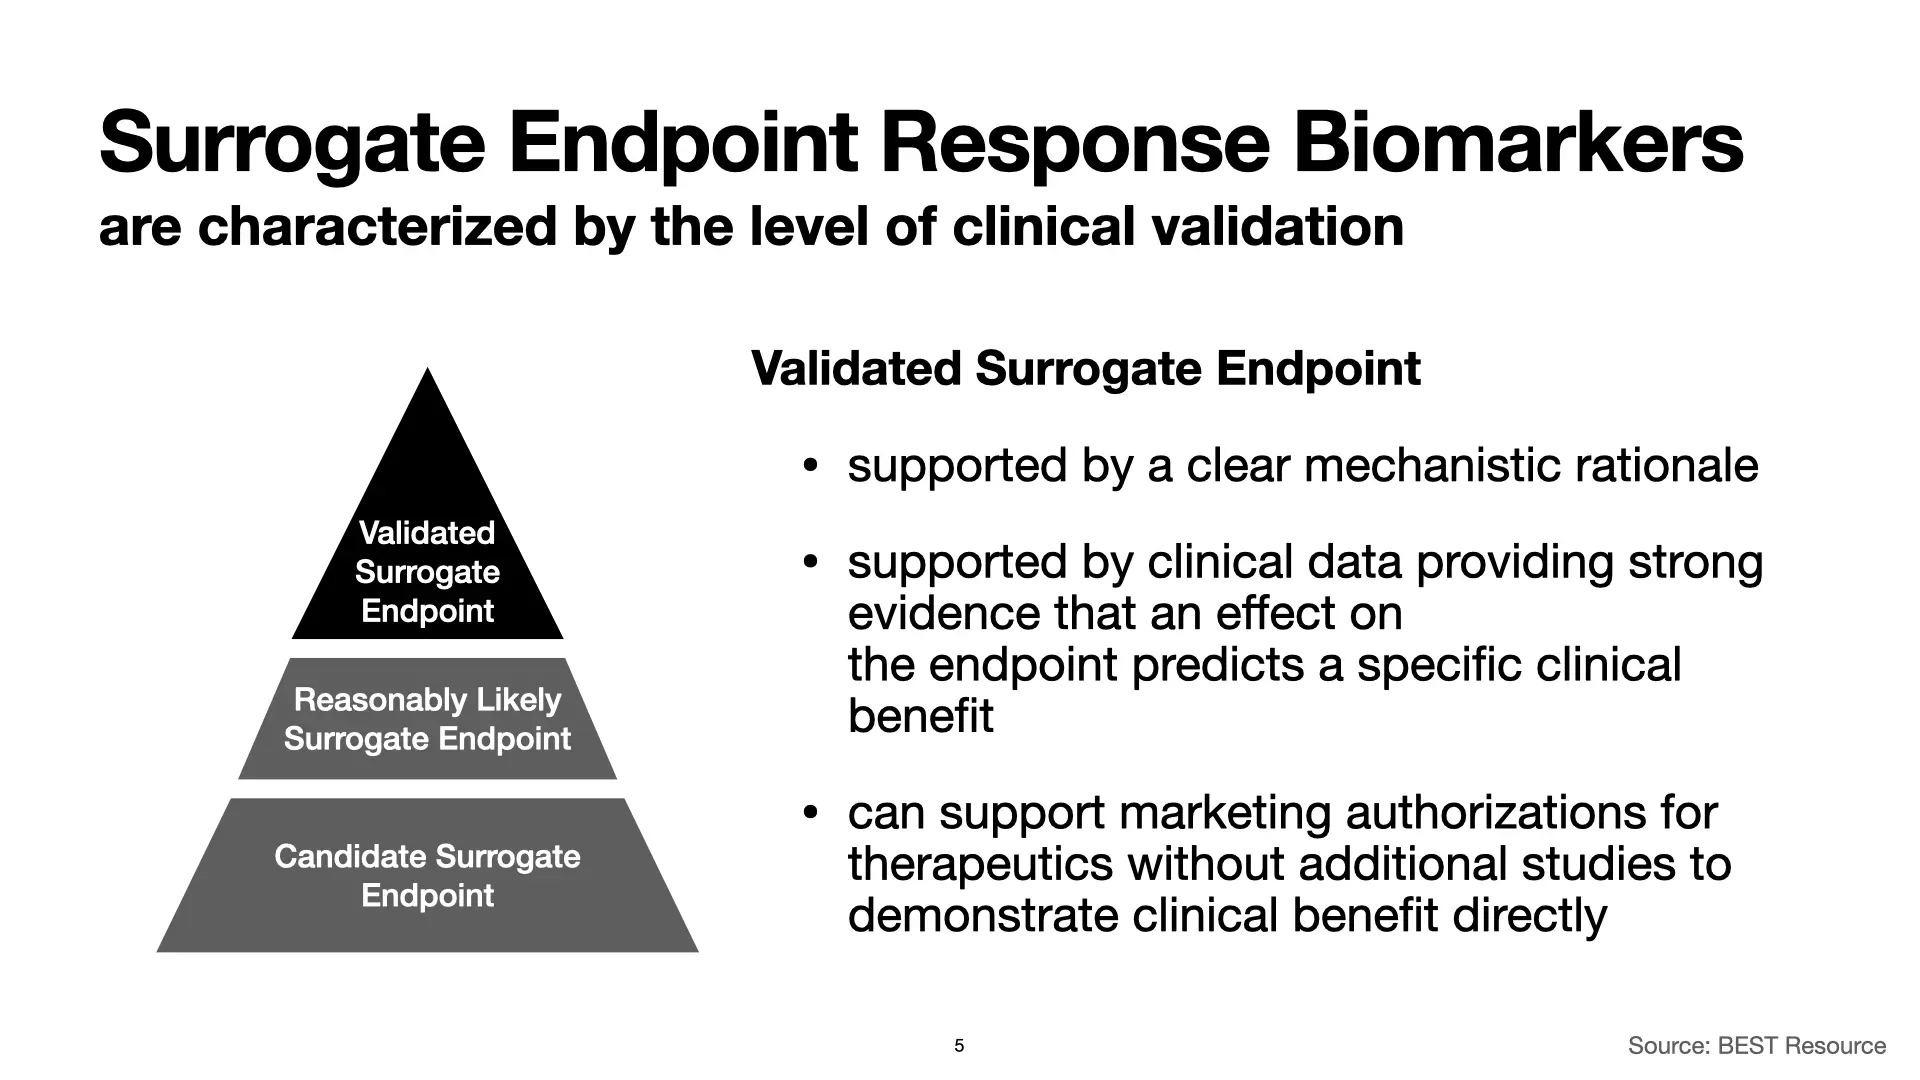 Slide 5: Surrogate Endpoint Response Biomarkers are characterized by the level of clinical validation. The pyramid graphic appears again, with 'Validated Surrogate Endpoint' highlighted. A Validated Surrogate Endpoint has a clear mechanistic rationale, clinical data providing strong evidence that an effect on the endpoint predicts a specific clinical benefit, and can support marketing authorizations for therapeutics without additional studies to demonstrate clinical benefit directly. Source: BEST Resource.